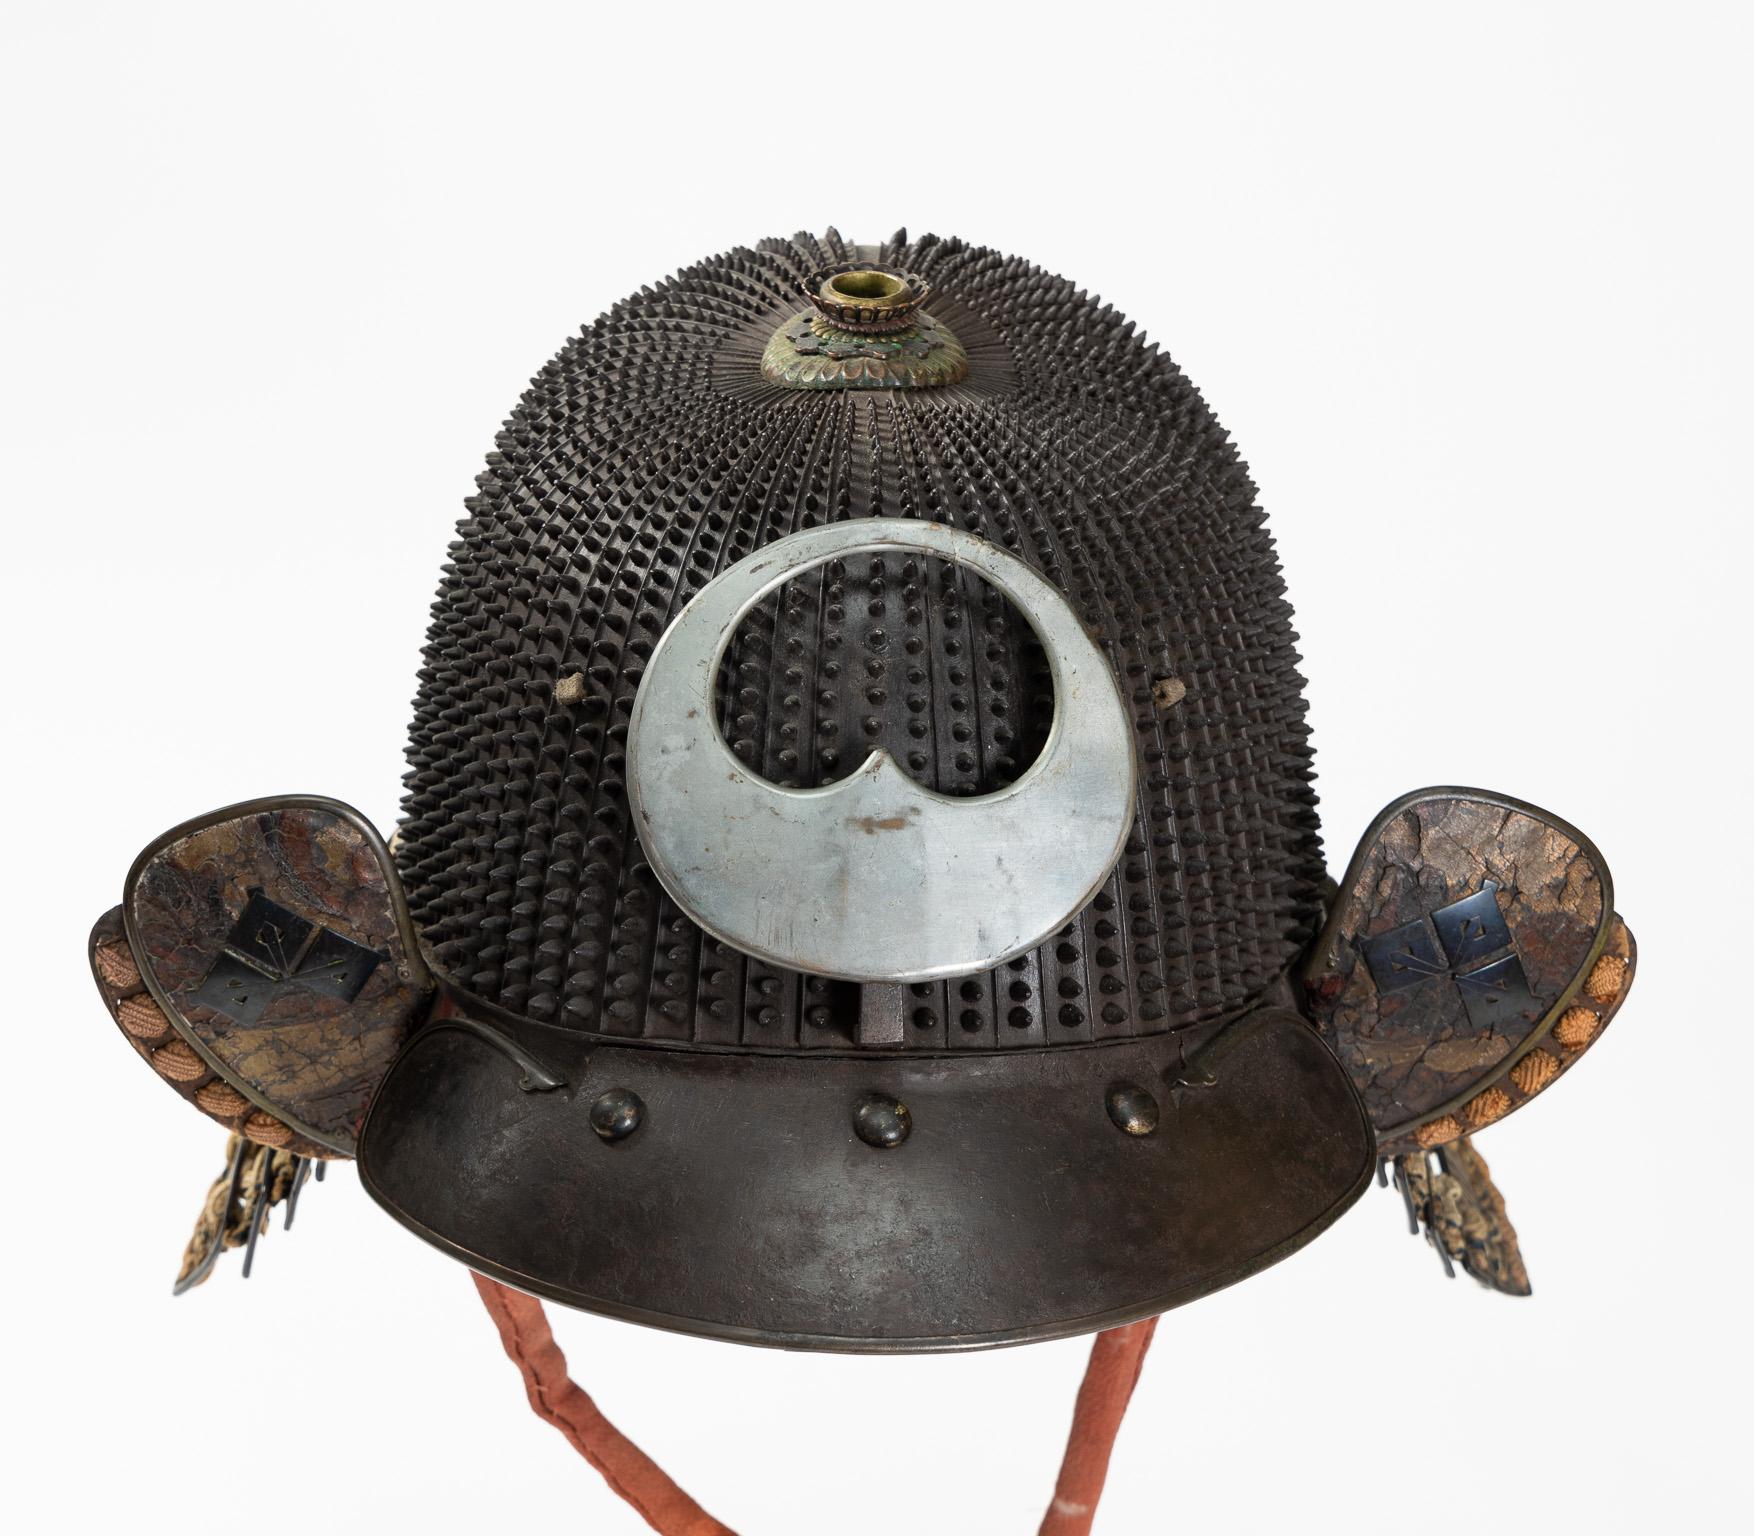 Koboshi kabuto
Samurai helmet with standing rivets
Haruta School
Early Edo Period, 17th century

A 62-plate koboshi-bachi [helmet bowl with small standing rivets] of typical tenkokuzan form, with 30 pointed rivets on each plate decreasing in